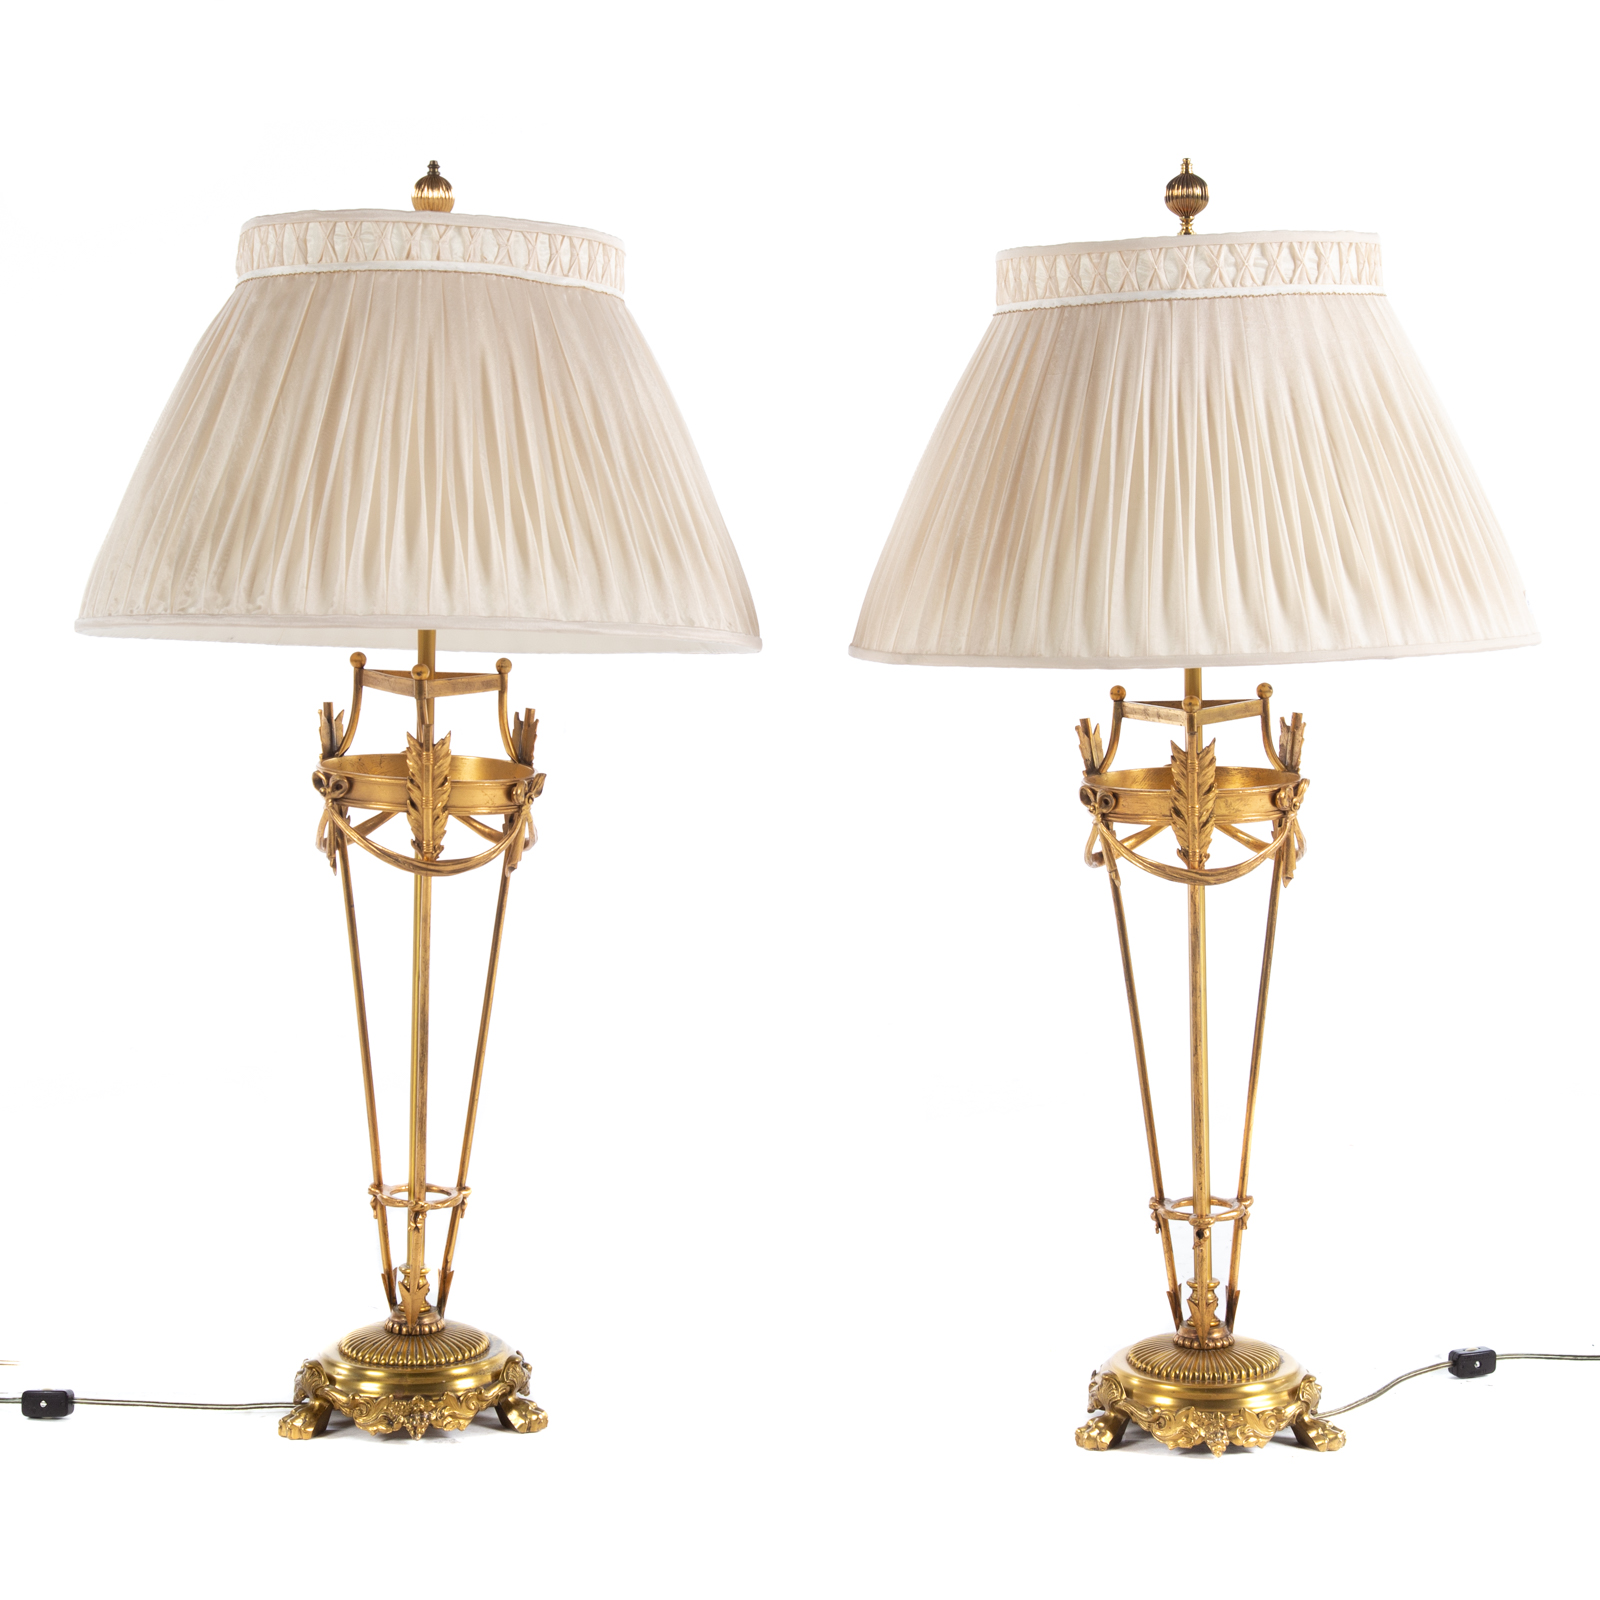 A PAIR OF FRENCH CLASSICAL STYLE 3cb6f0